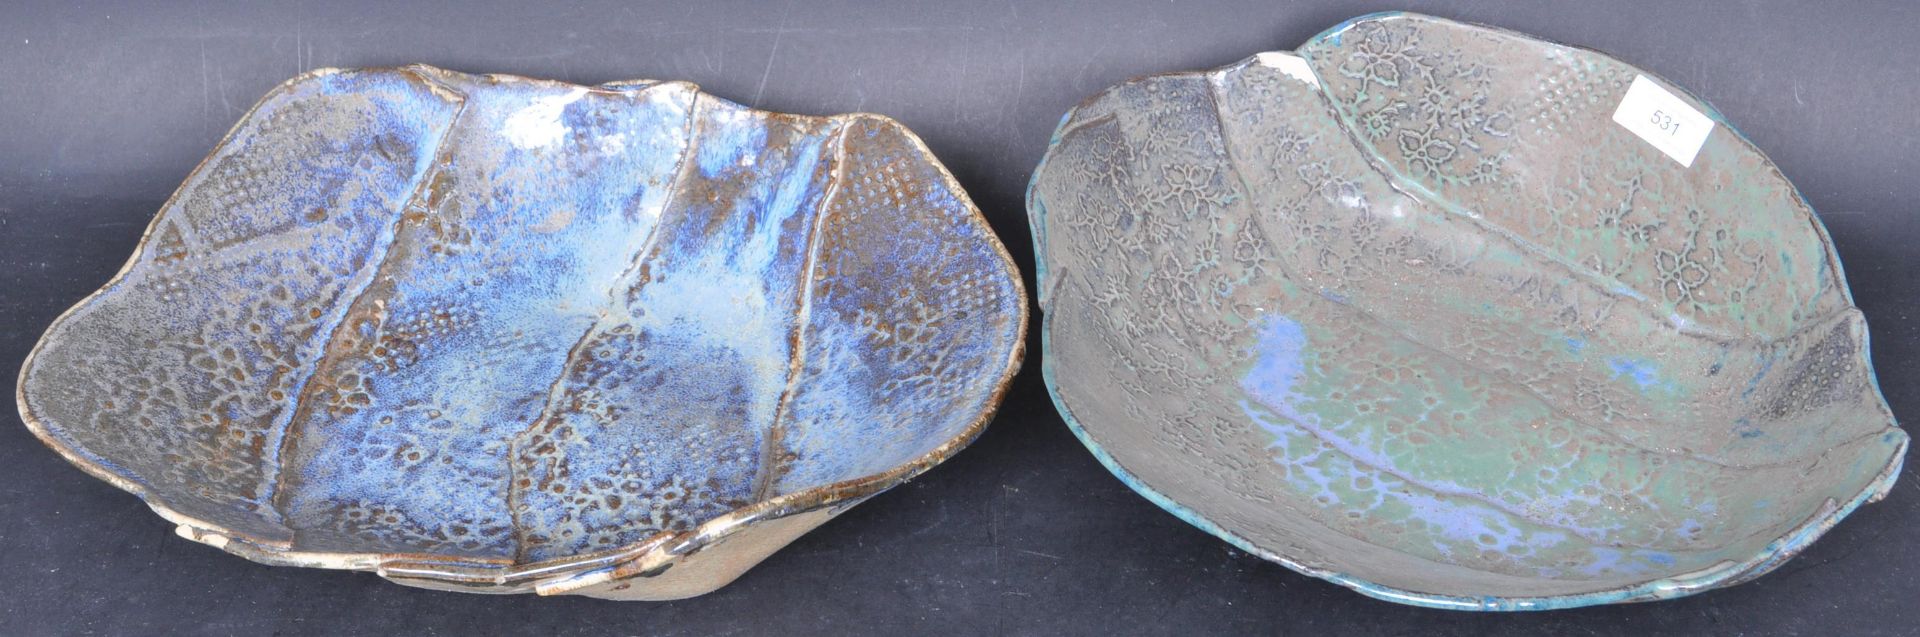 PAIR OF VINTAGE 20TH CENTURY STUDIO ART POTTERY BOWLS BY JO YOUNG - Image 2 of 14